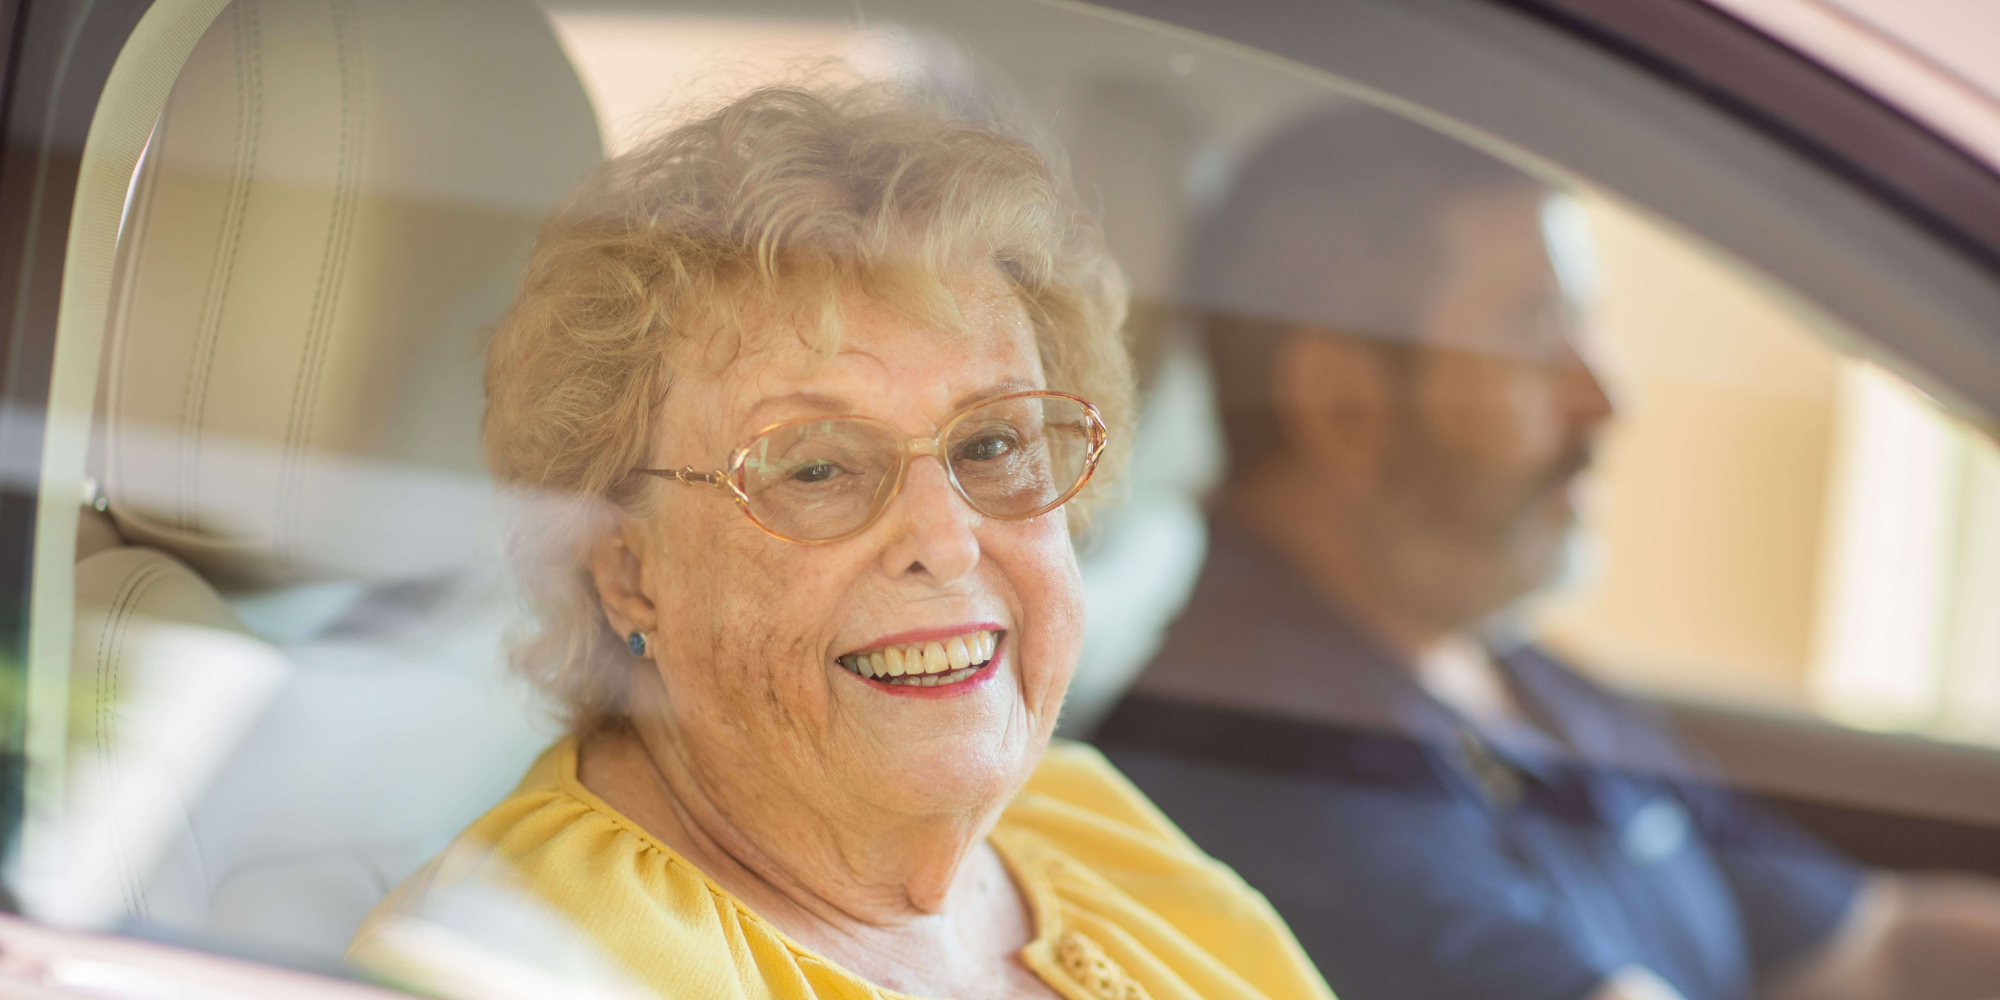 Senior resident receiving a ride from a caregiver and smiling while looking out of the window